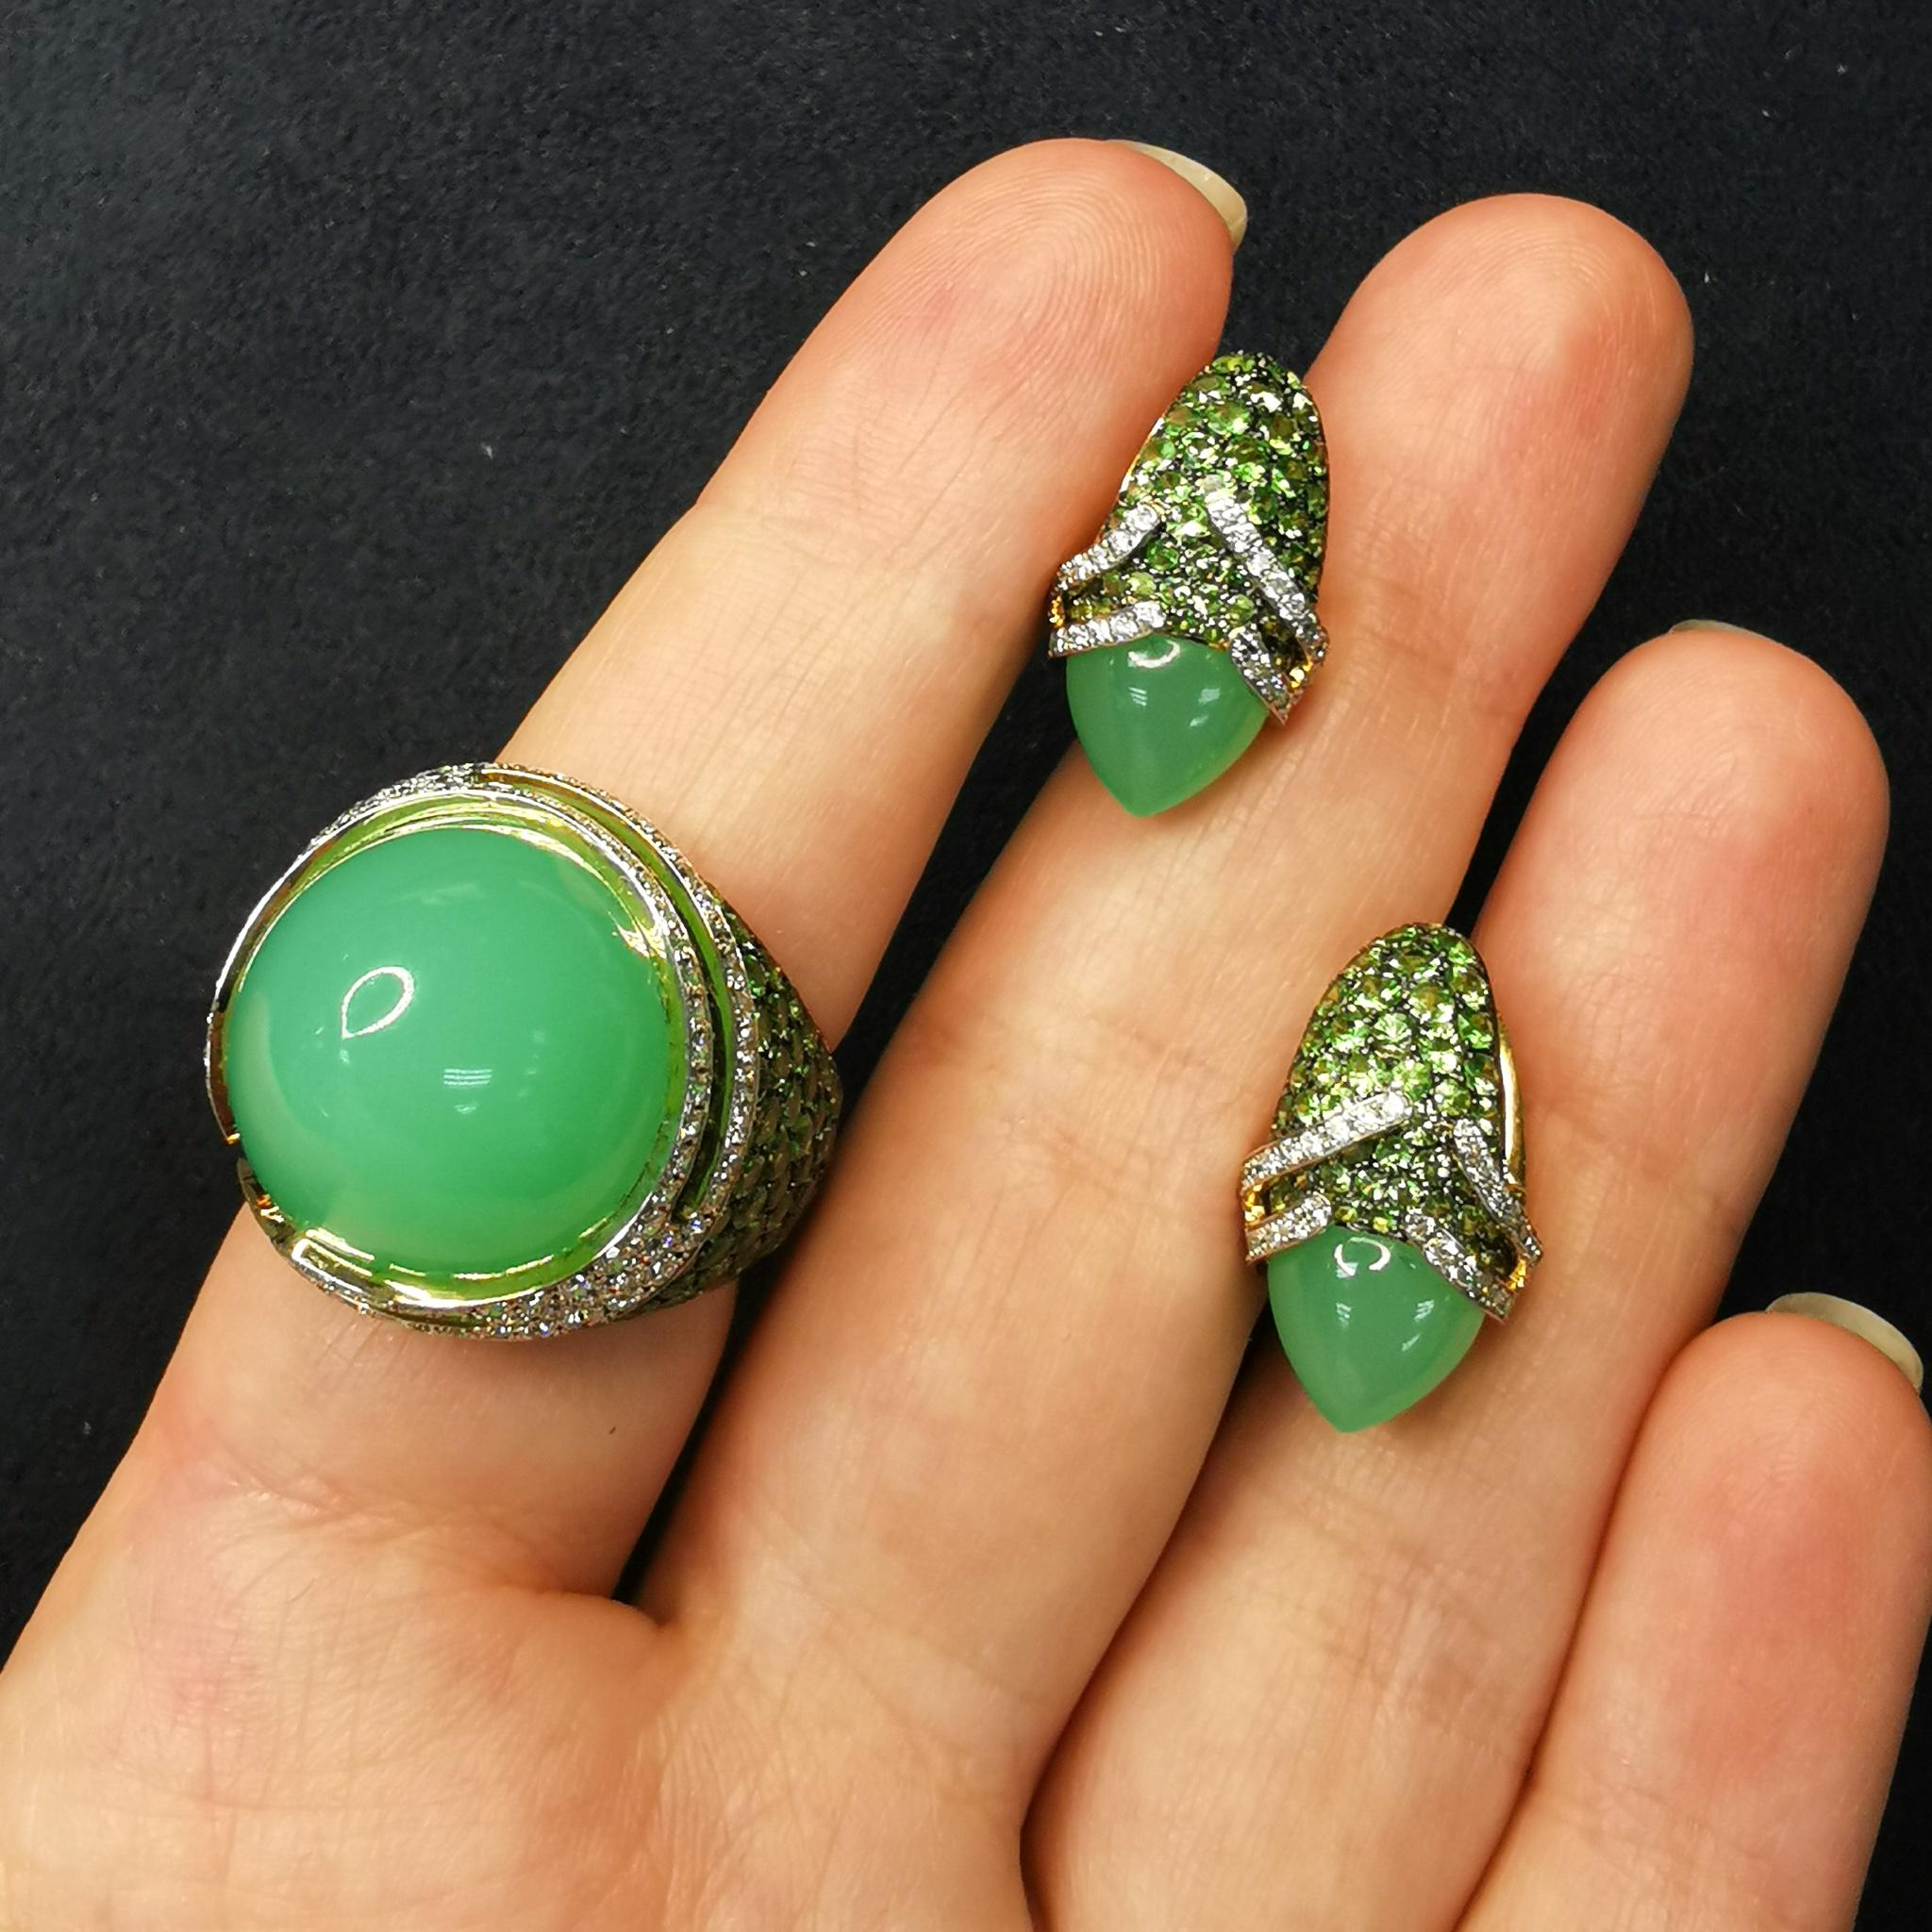 Chrysoprase Tsavorites Diamonds 18 Karat Gold Fuji Suite
Series of these Rings and Earrings isn't called Fuji for nothing, since the inspiration for the creation of these products came to us exactly from the contemplation of this majestic mountain.